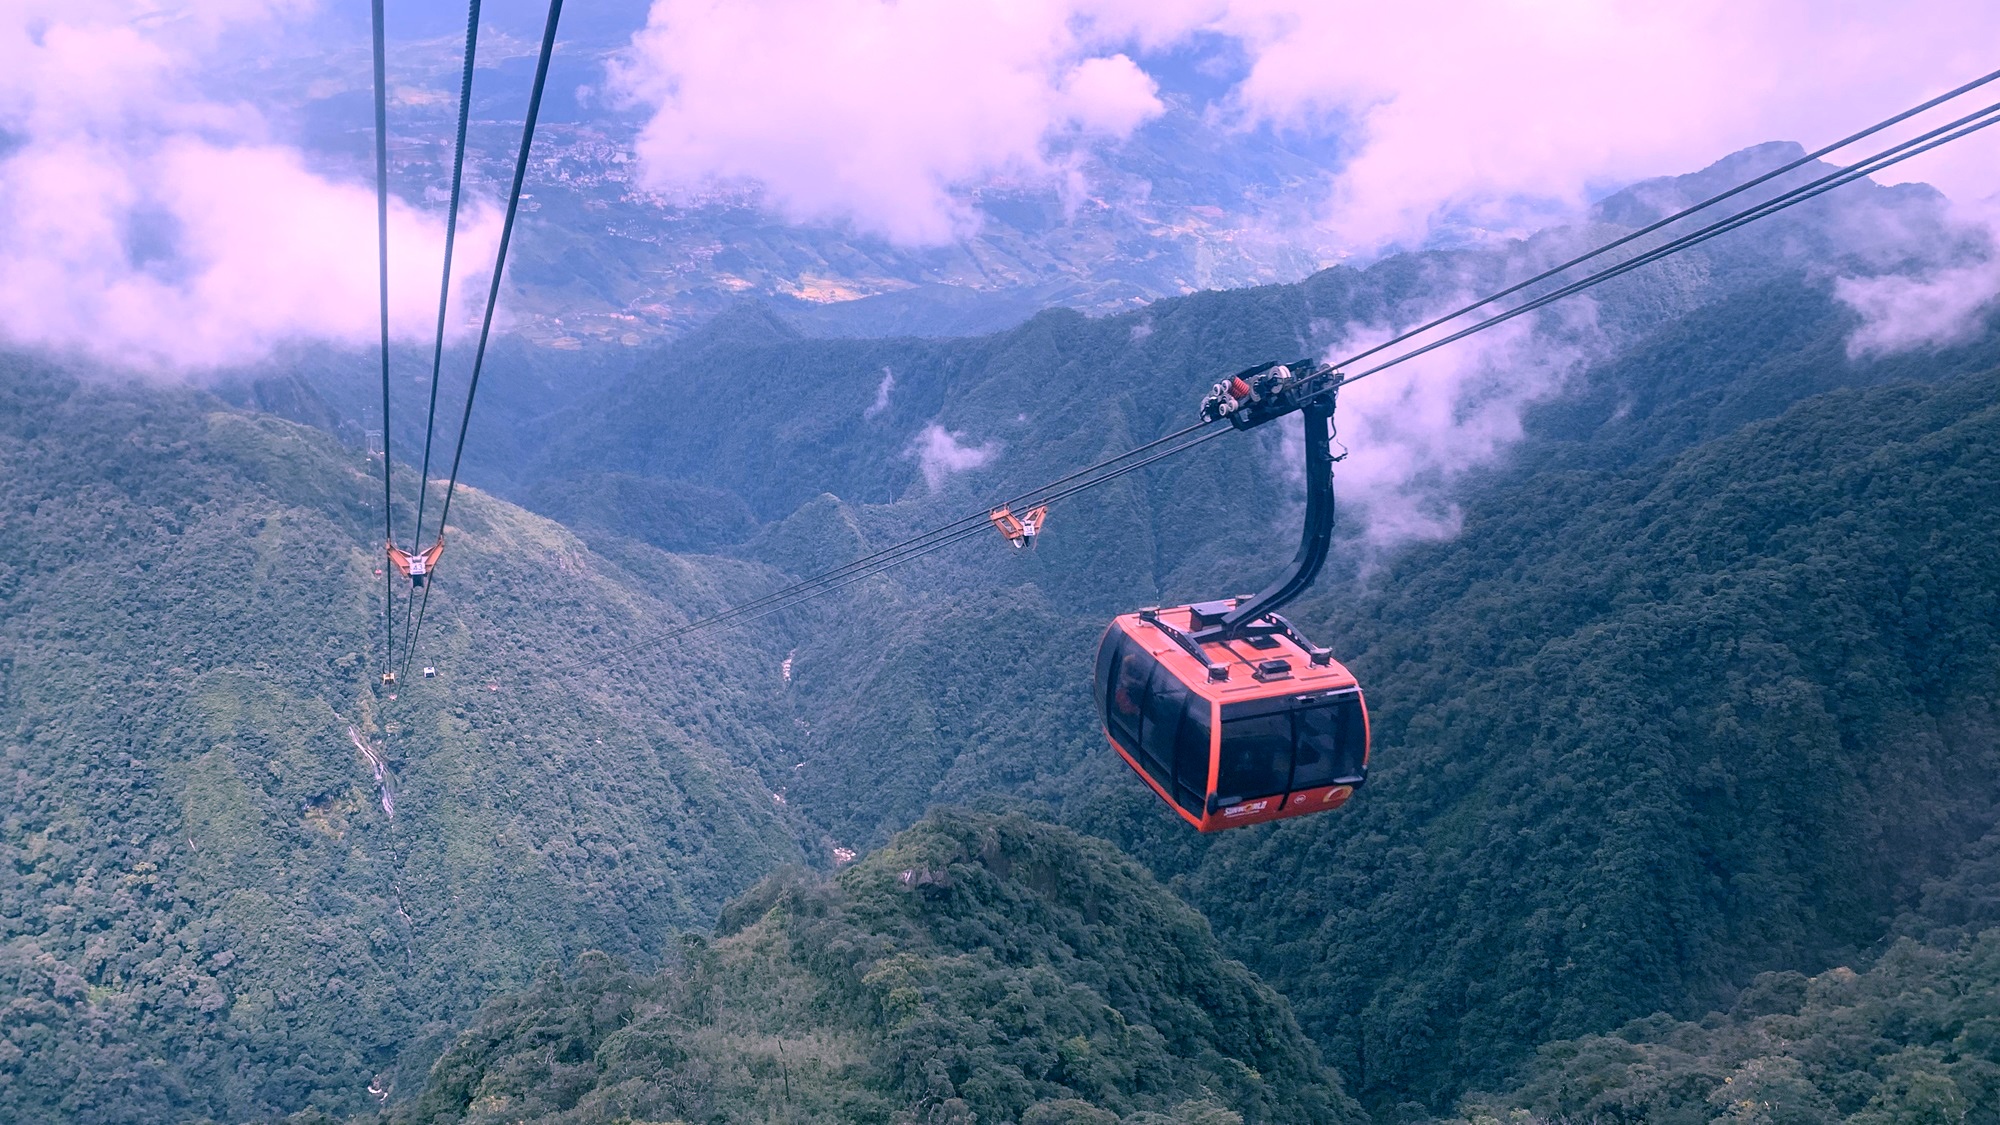 Trekking Muong Hoa Valley & Cable Car to Fansipan 2 days